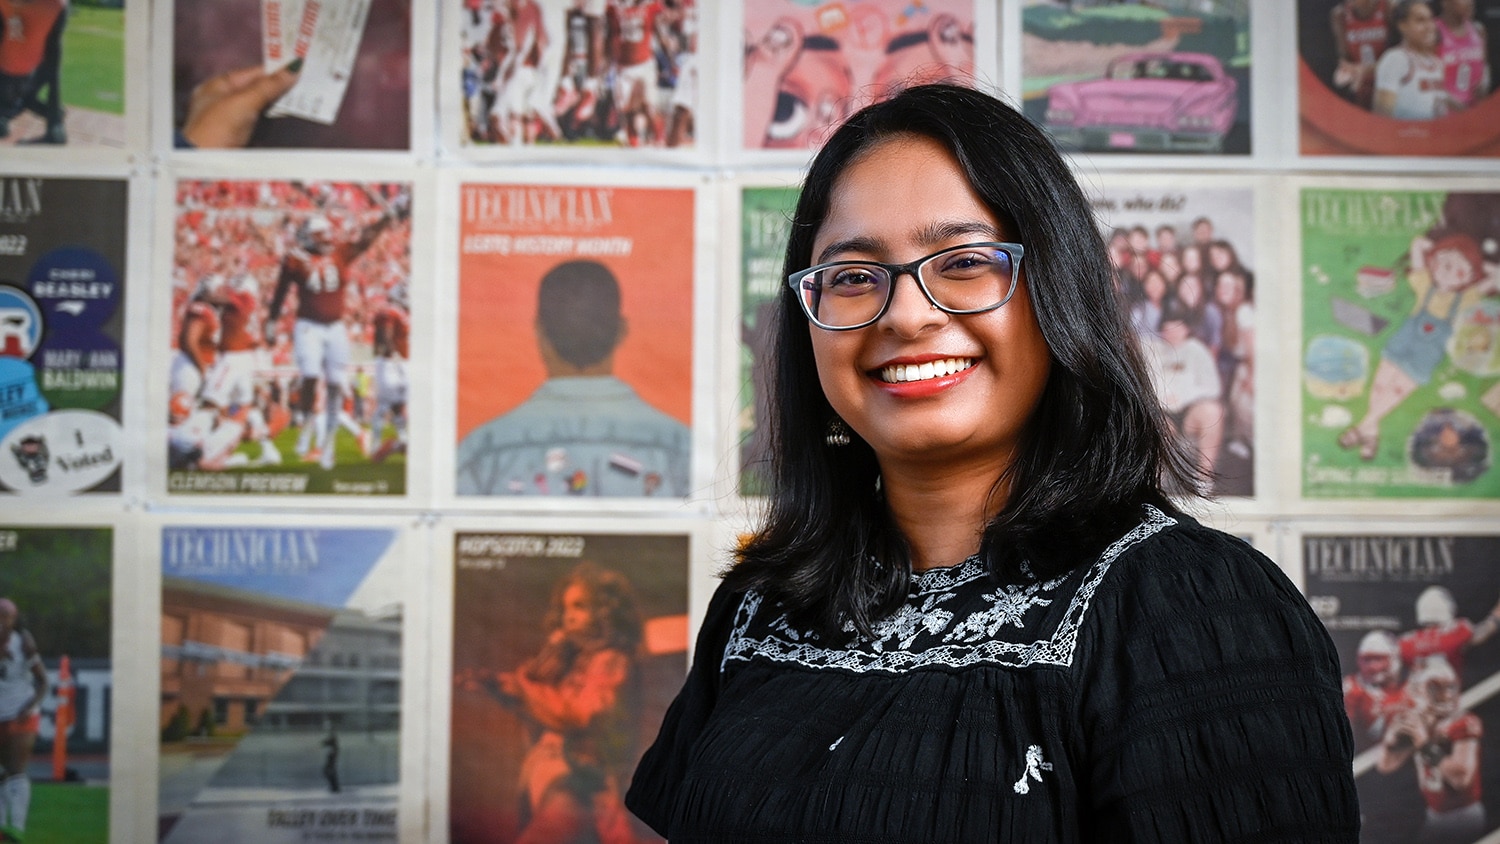 Portrait of Shilpa Giri in front of a wall of Technician covers.